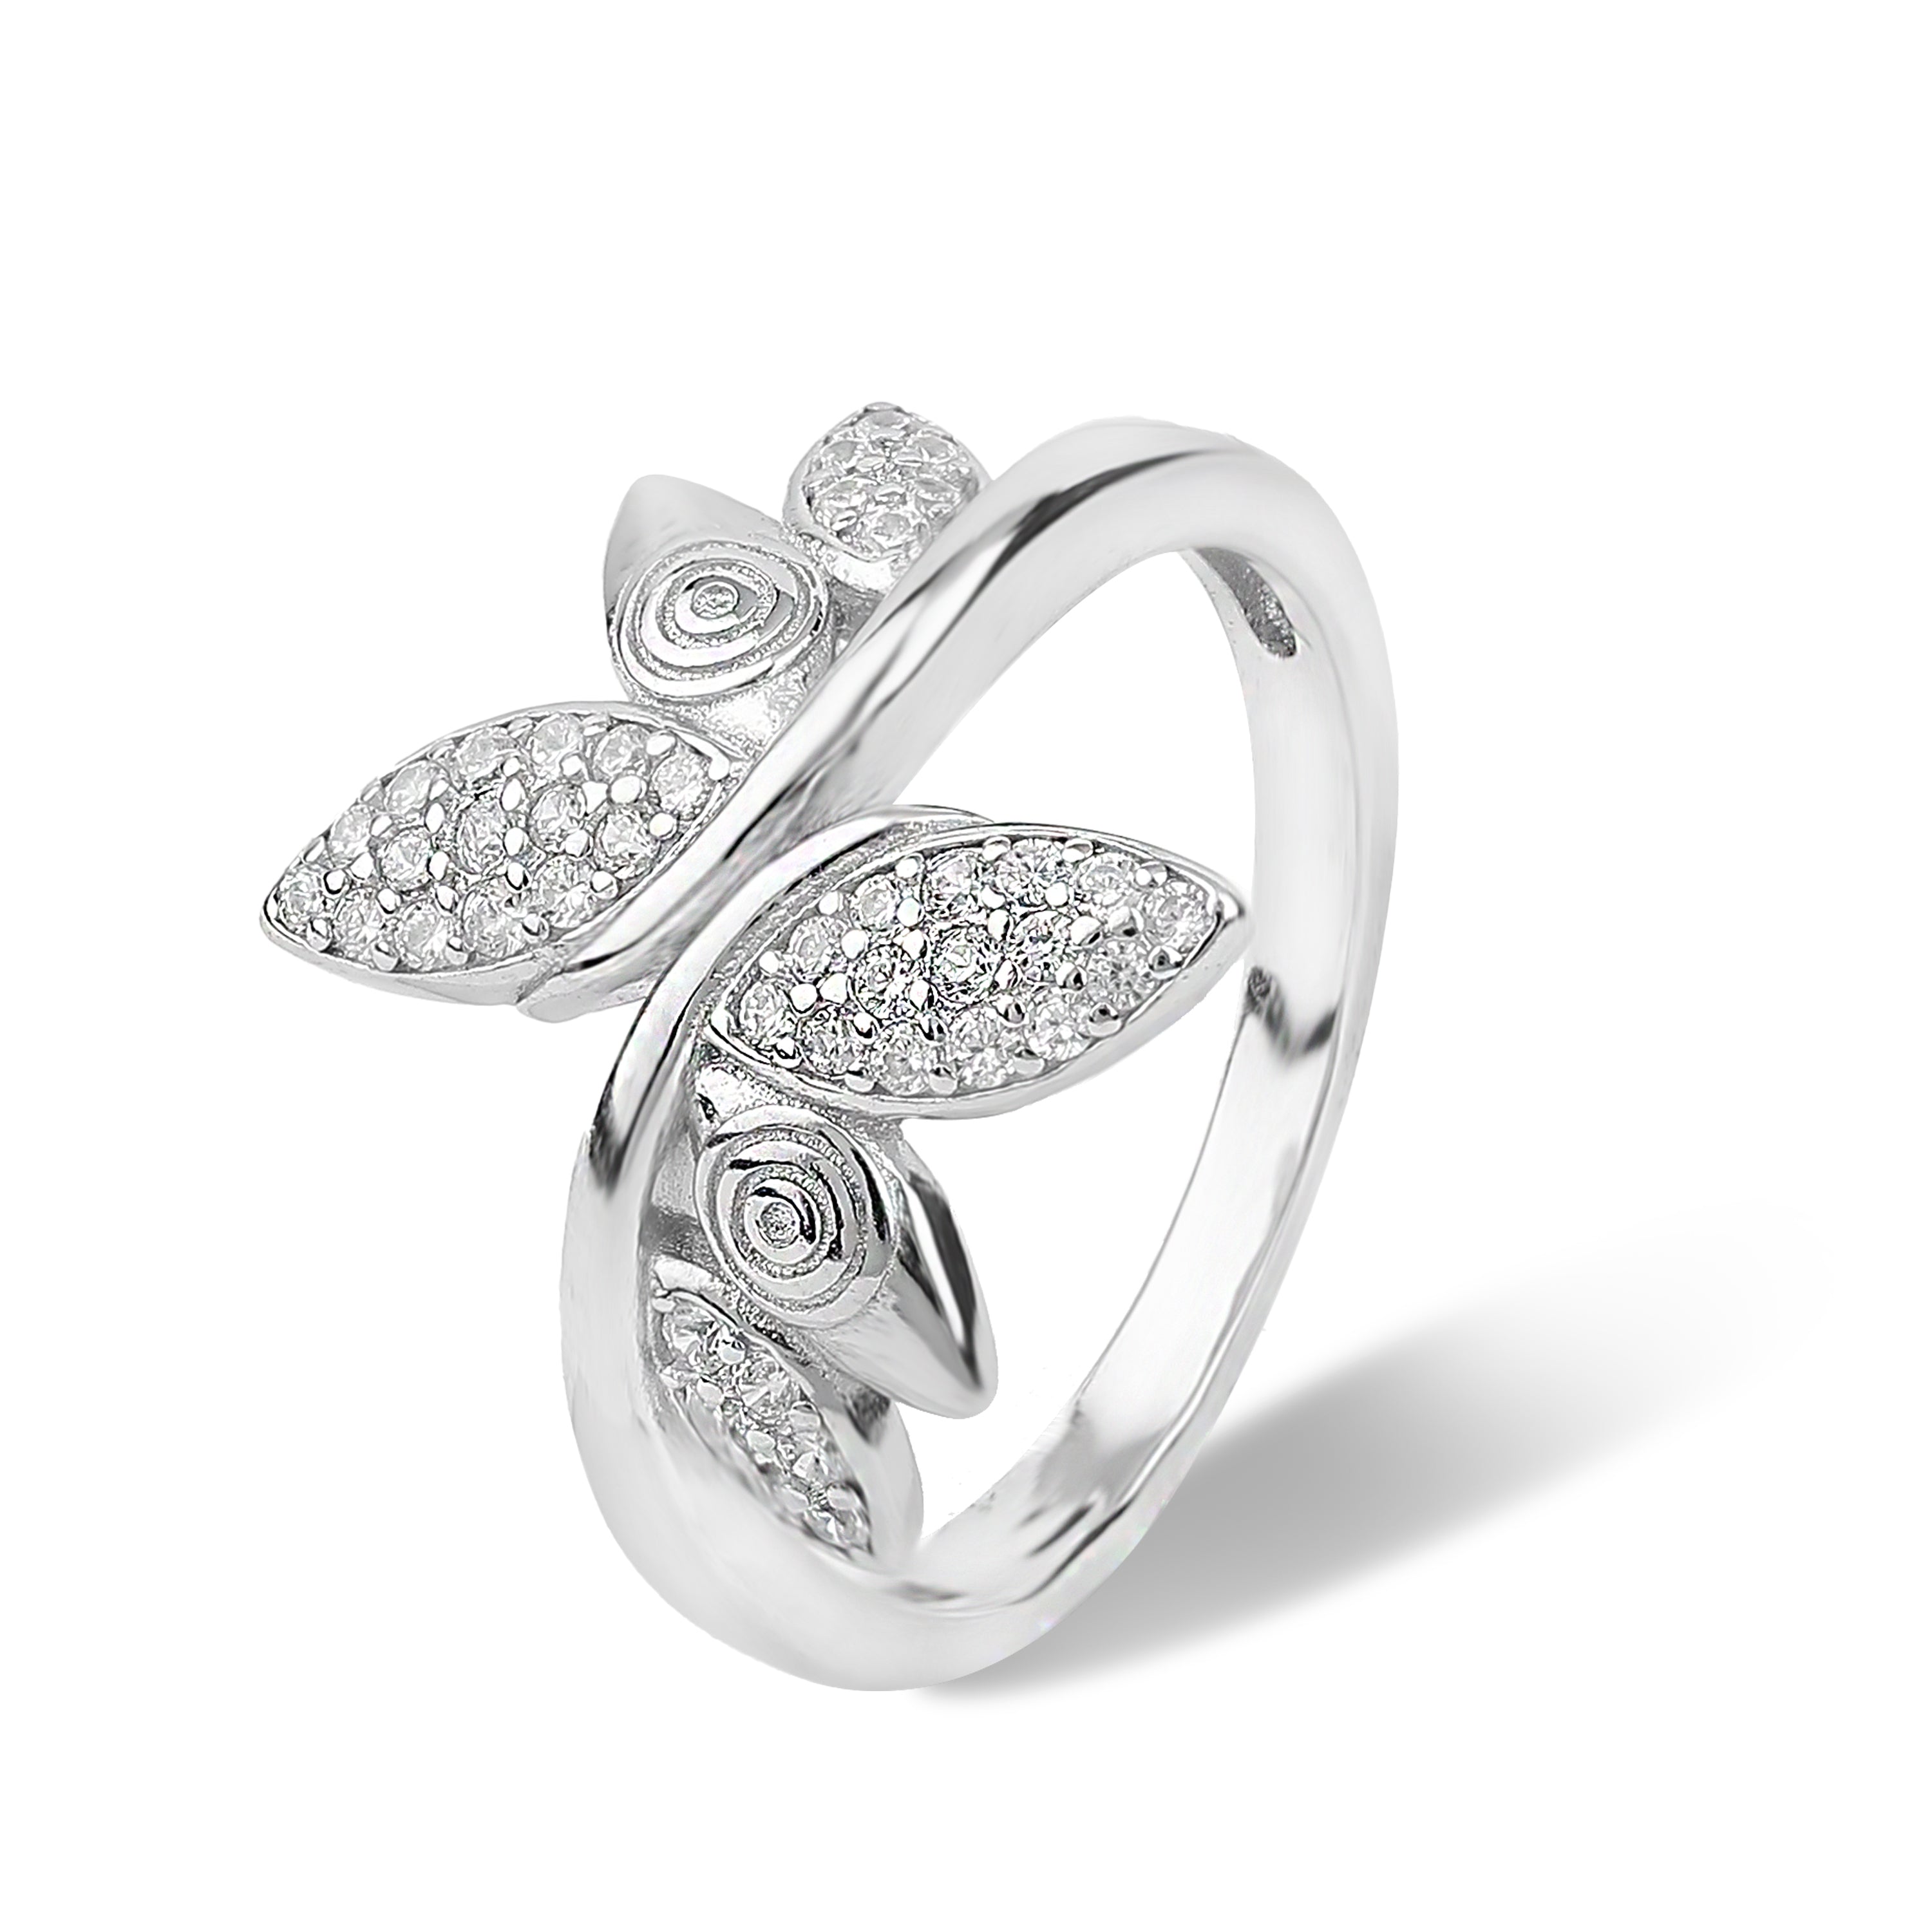 Spiral adorned double leaf silver diamond ring